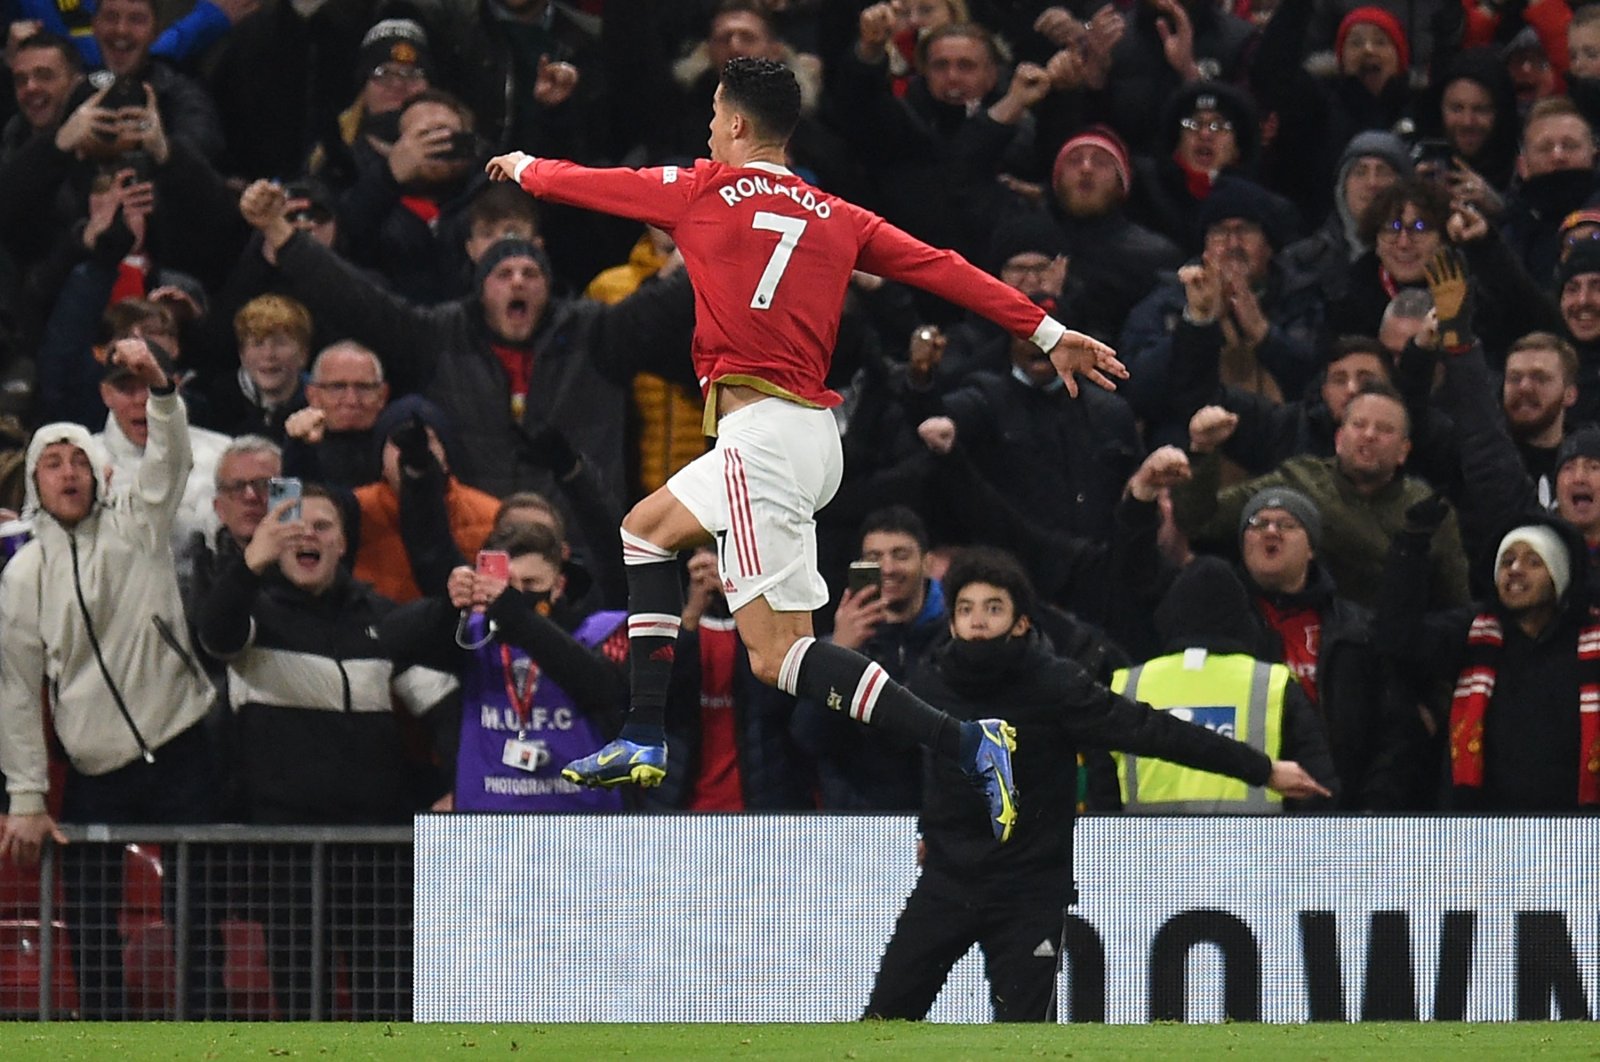 Manchester United&#039;s Portuguese striker Cristiano Ronaldo (C) celebrates after scoring the team&#039;s second goal, his 800th for the club and the country in his career, during the English Premier League football match against Arsenal at Old Trafford in Manchester, England, Dec. 2, 2021. (AFP Photo)